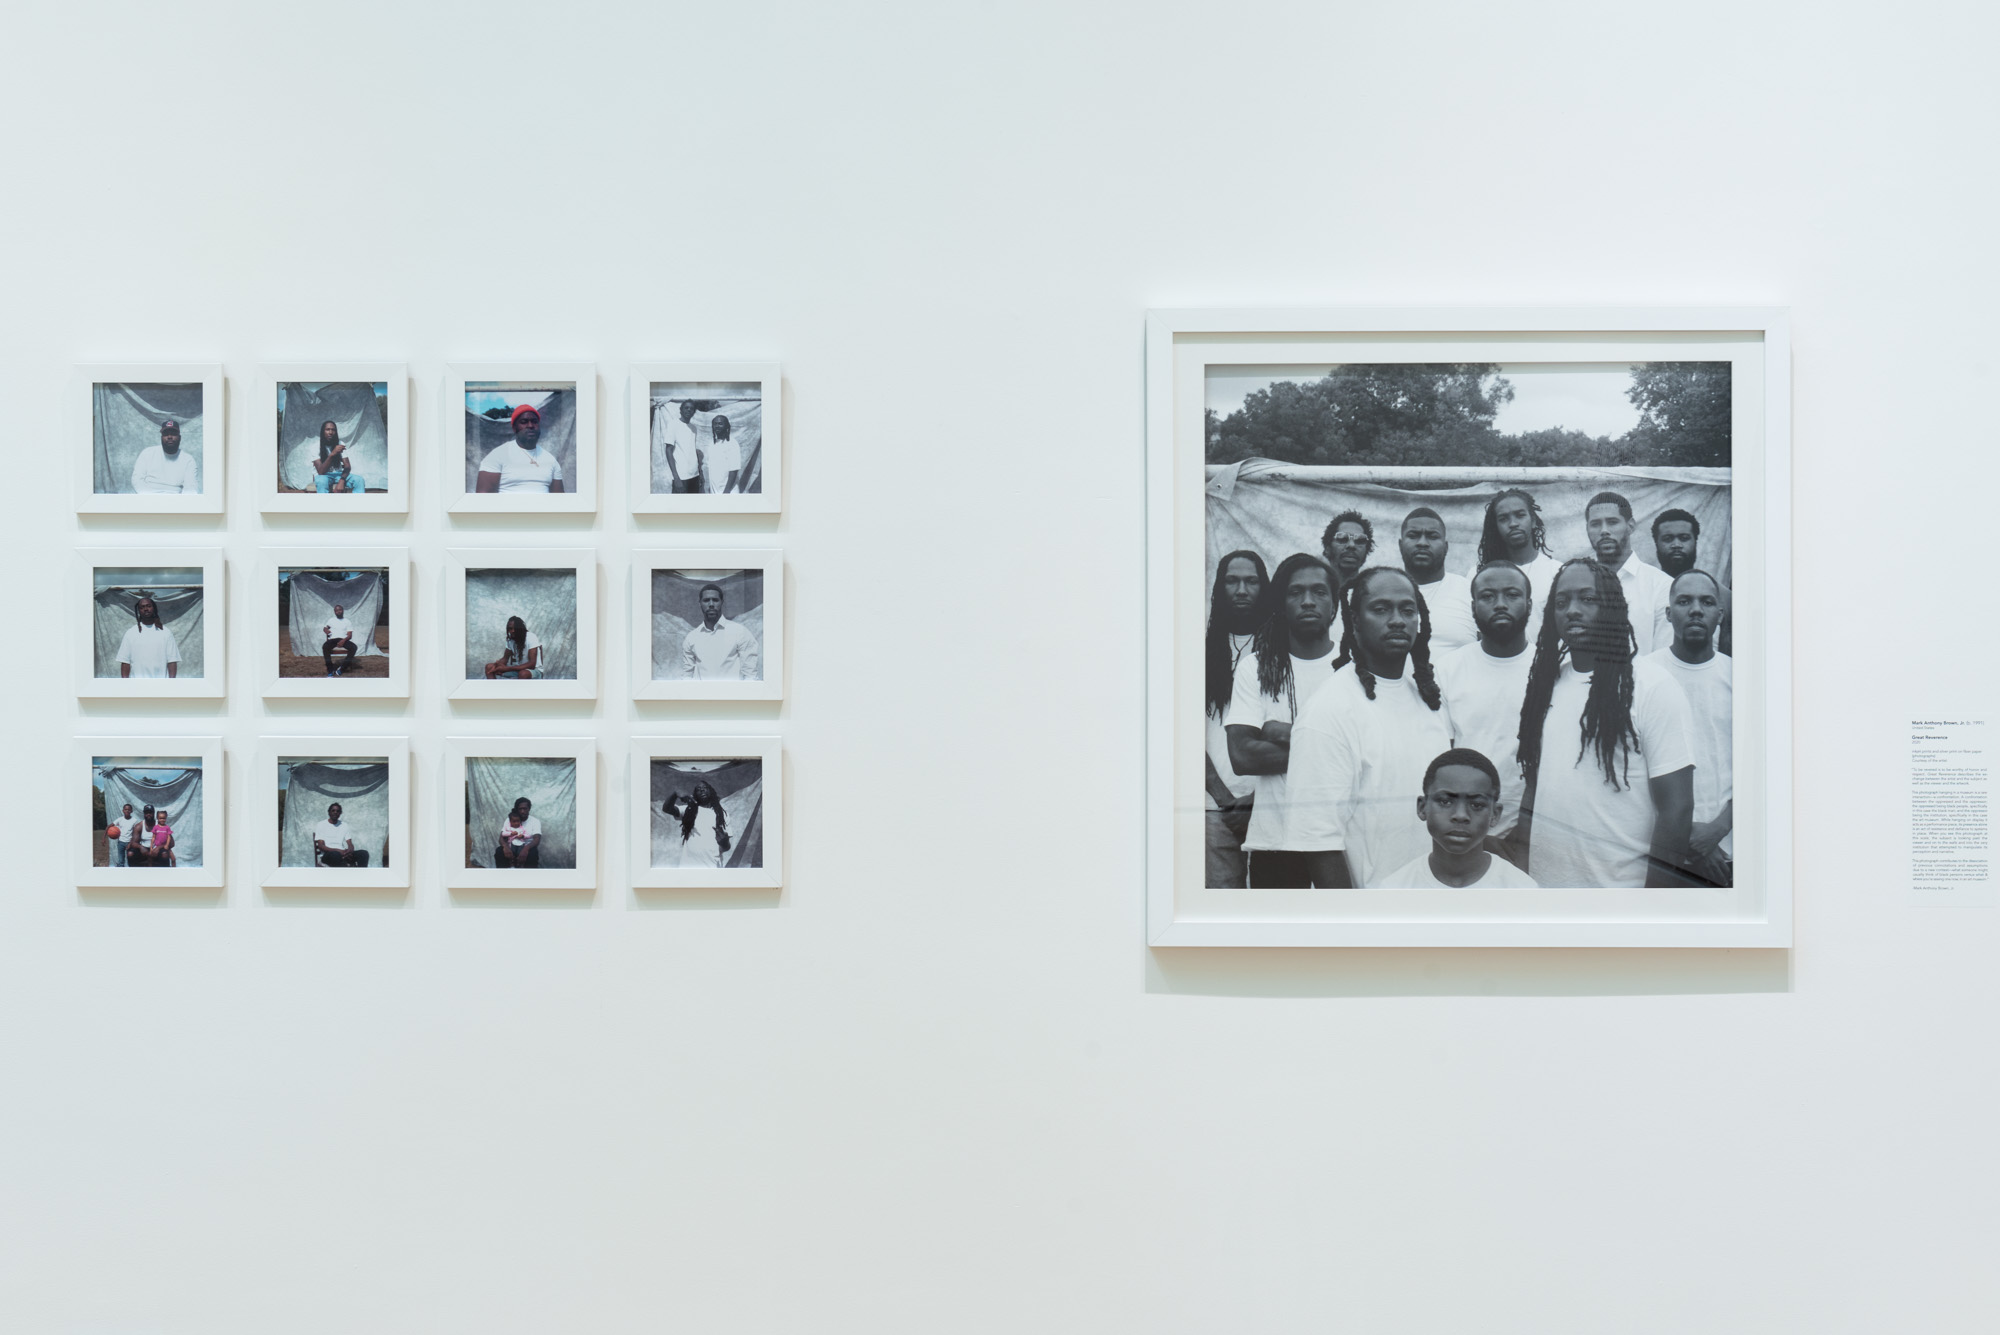 Mark Anthony Brown Jr.'s Great Reverence, a series of small square photographs of African Americans arranged in a four by three grid. The right is a large square photograph of all the subjects grouped together.